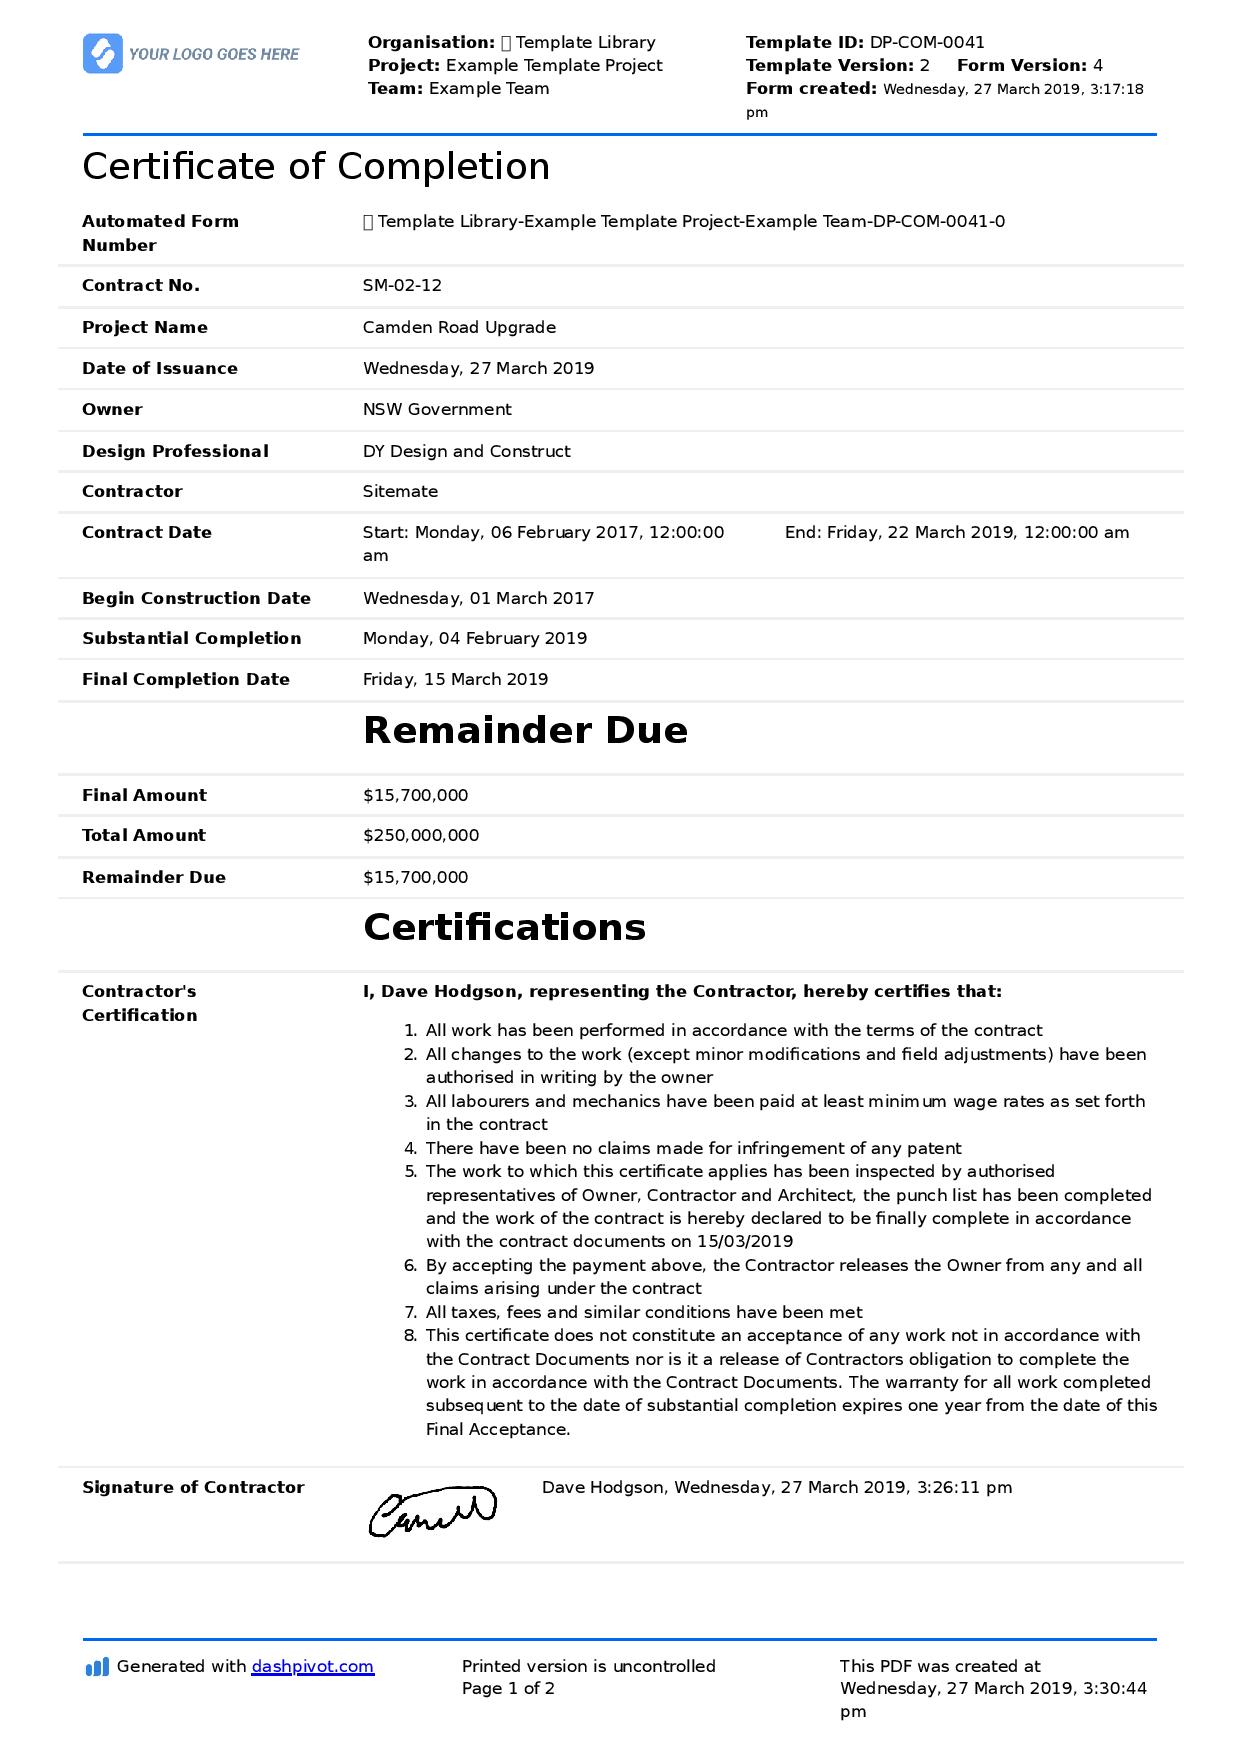 Certificate Of Completion For Construction (Free Template + With Regard To Certificate Of Completion Template Construction